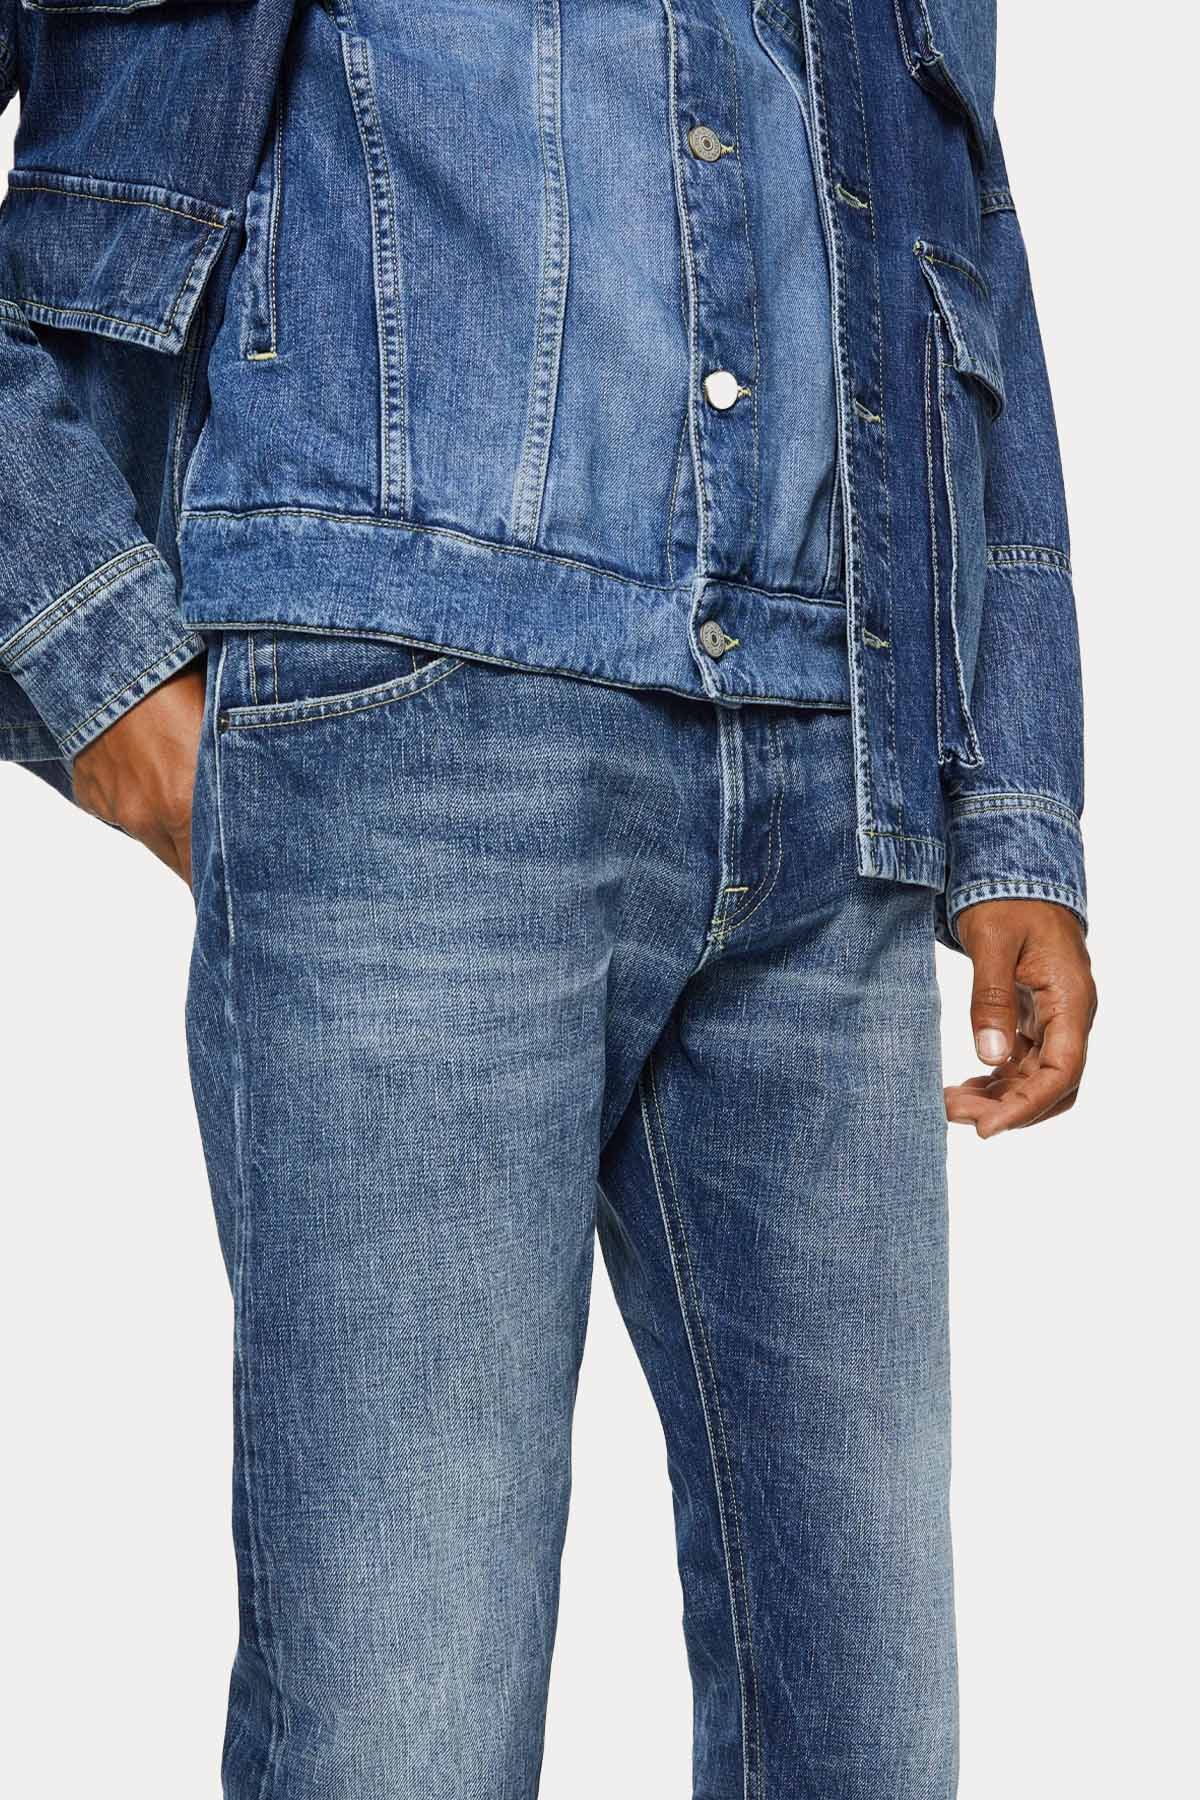 Dondup Icon Regular Fit Japanese Selvedge Jeans